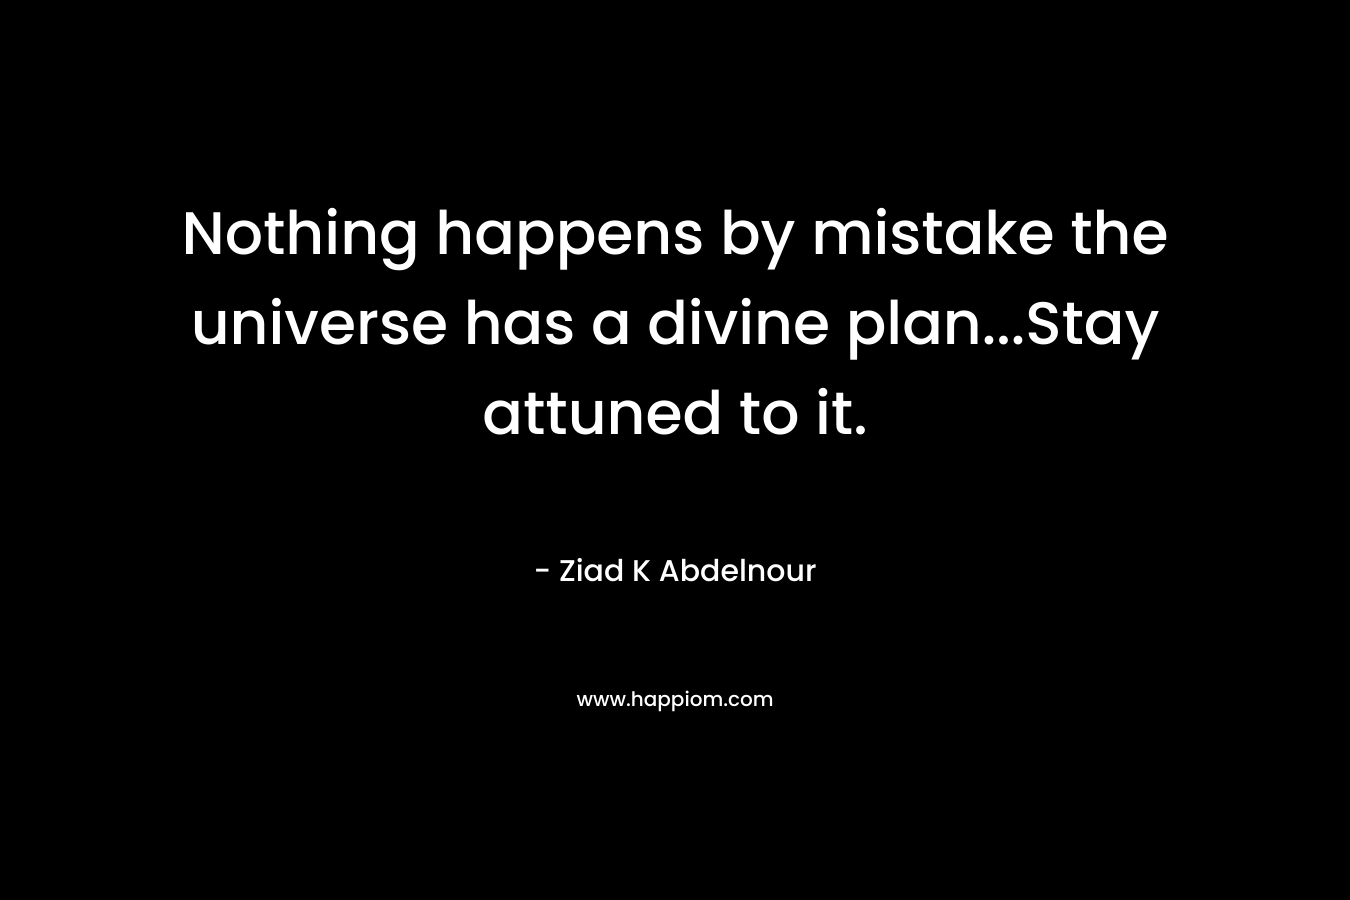 Nothing happens by mistake the universe has a divine plan...Stay attuned to it.